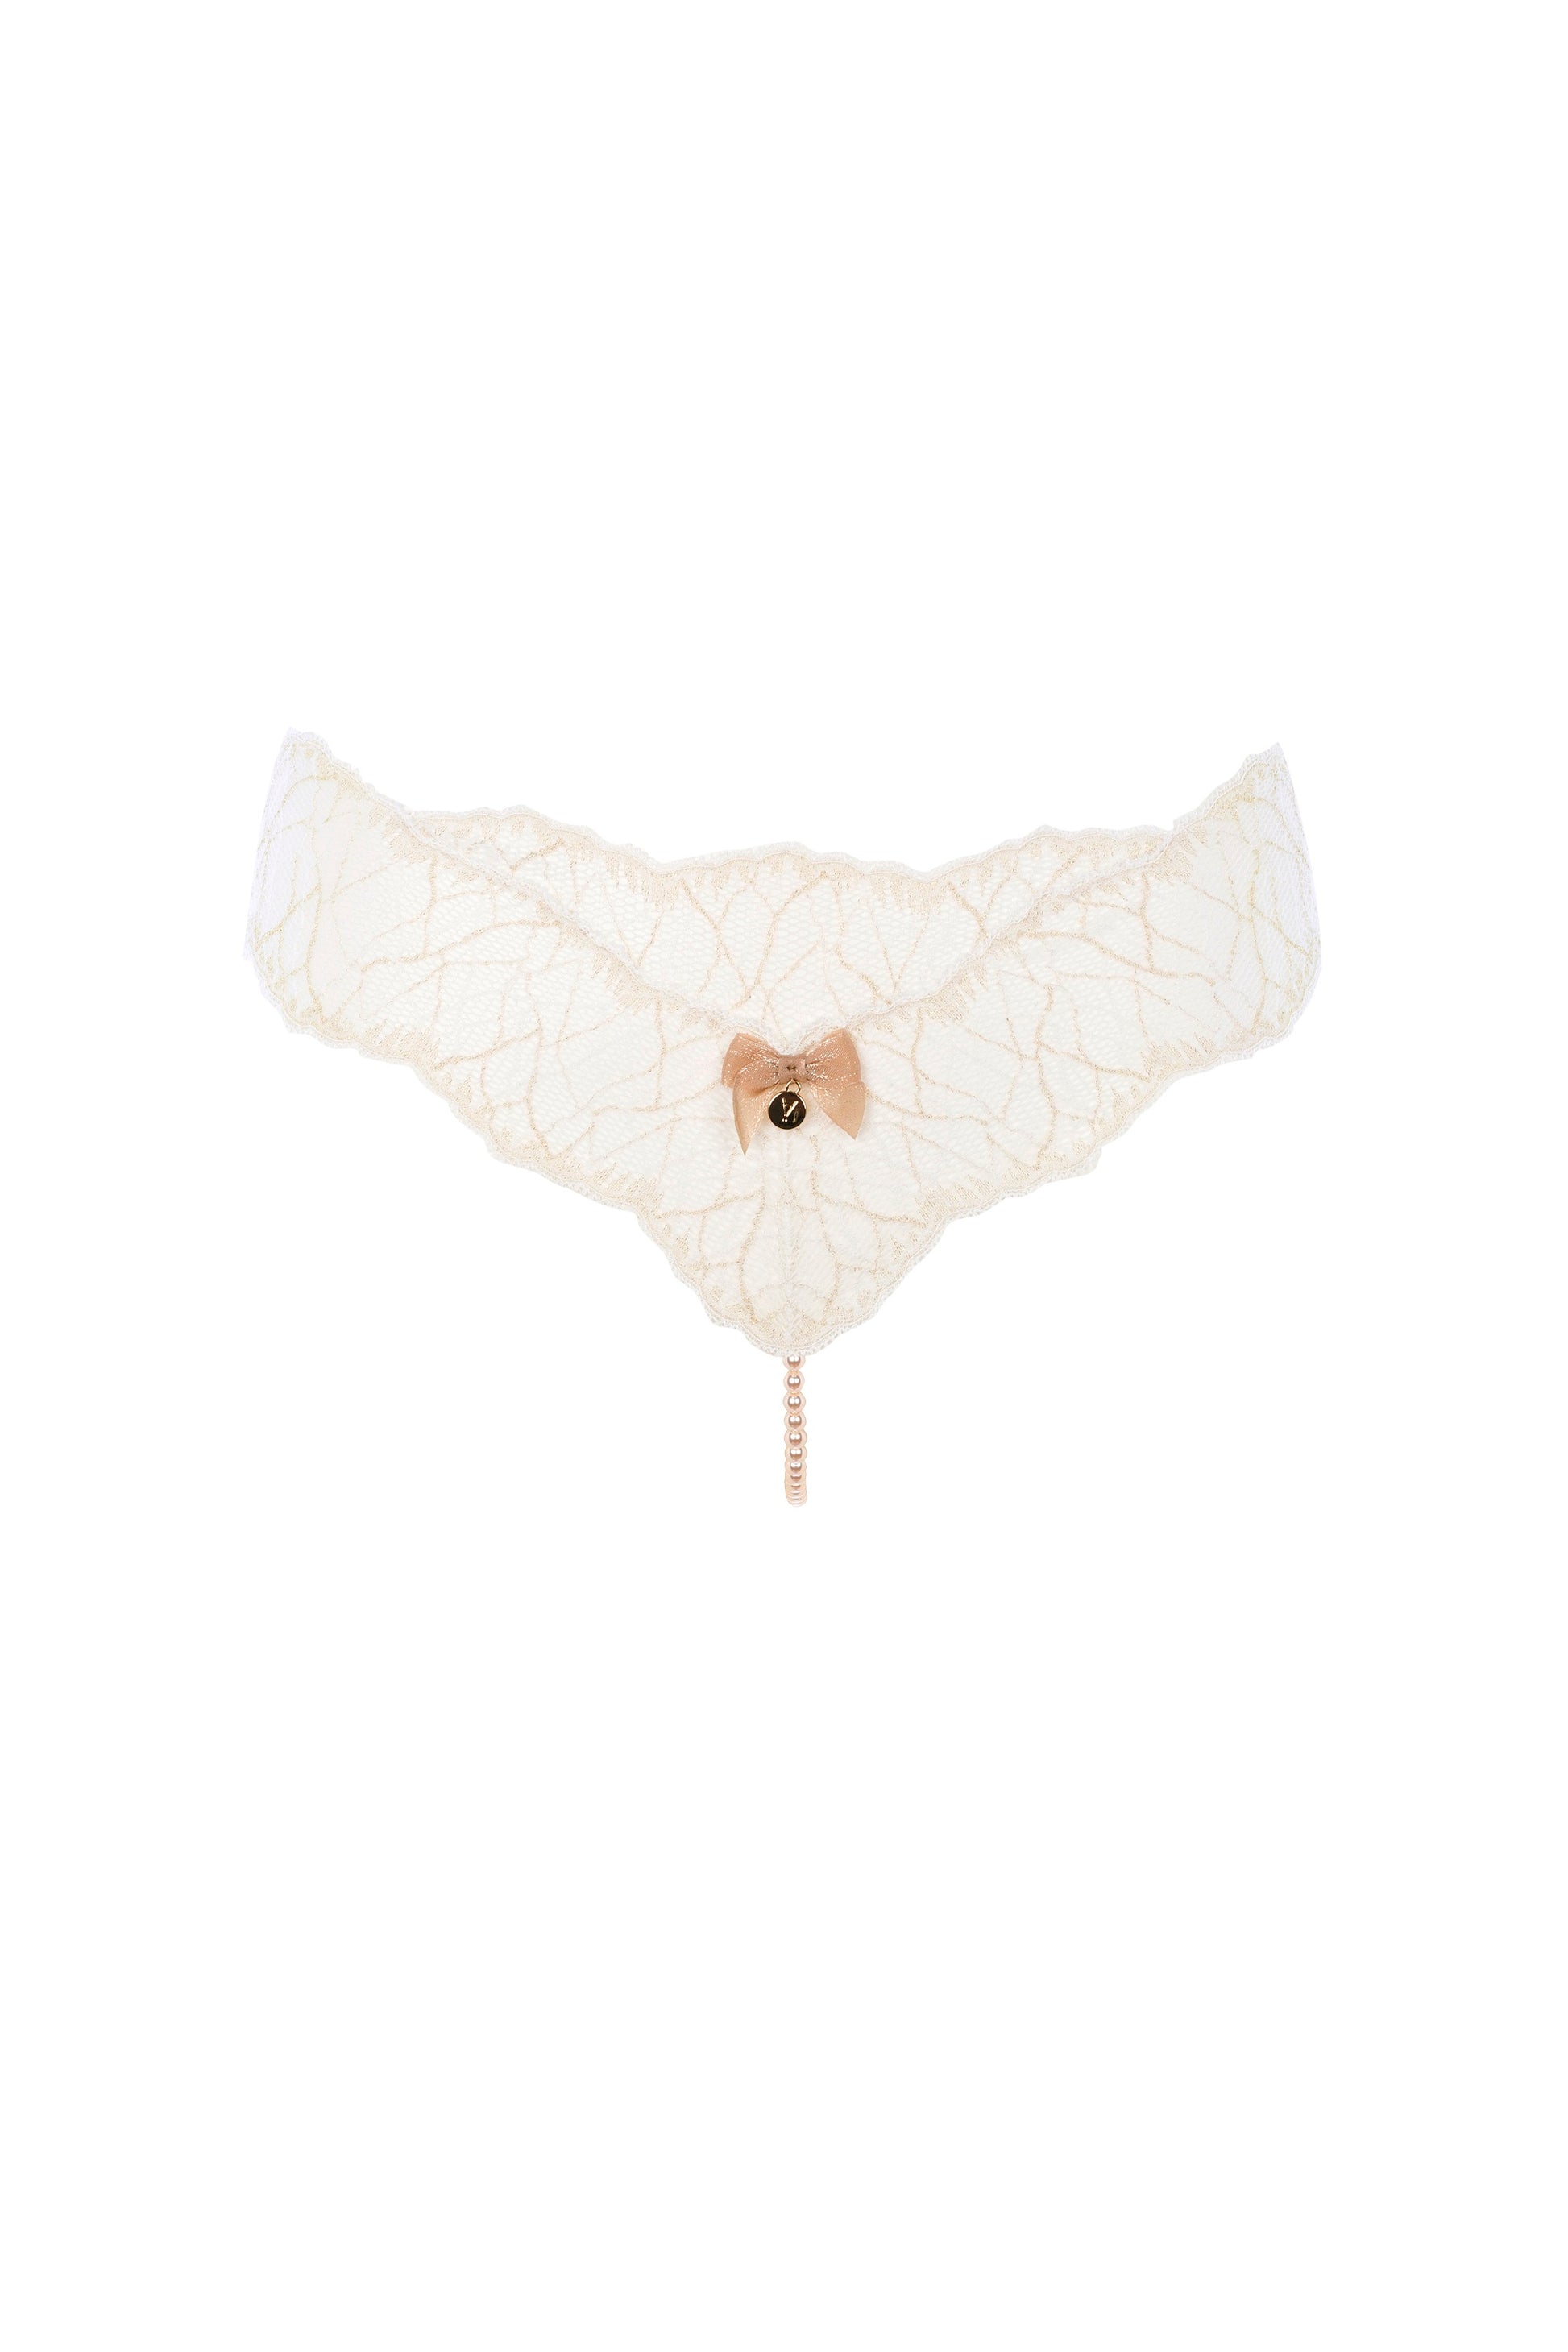 Sydney Single Thong Ivory front view product image